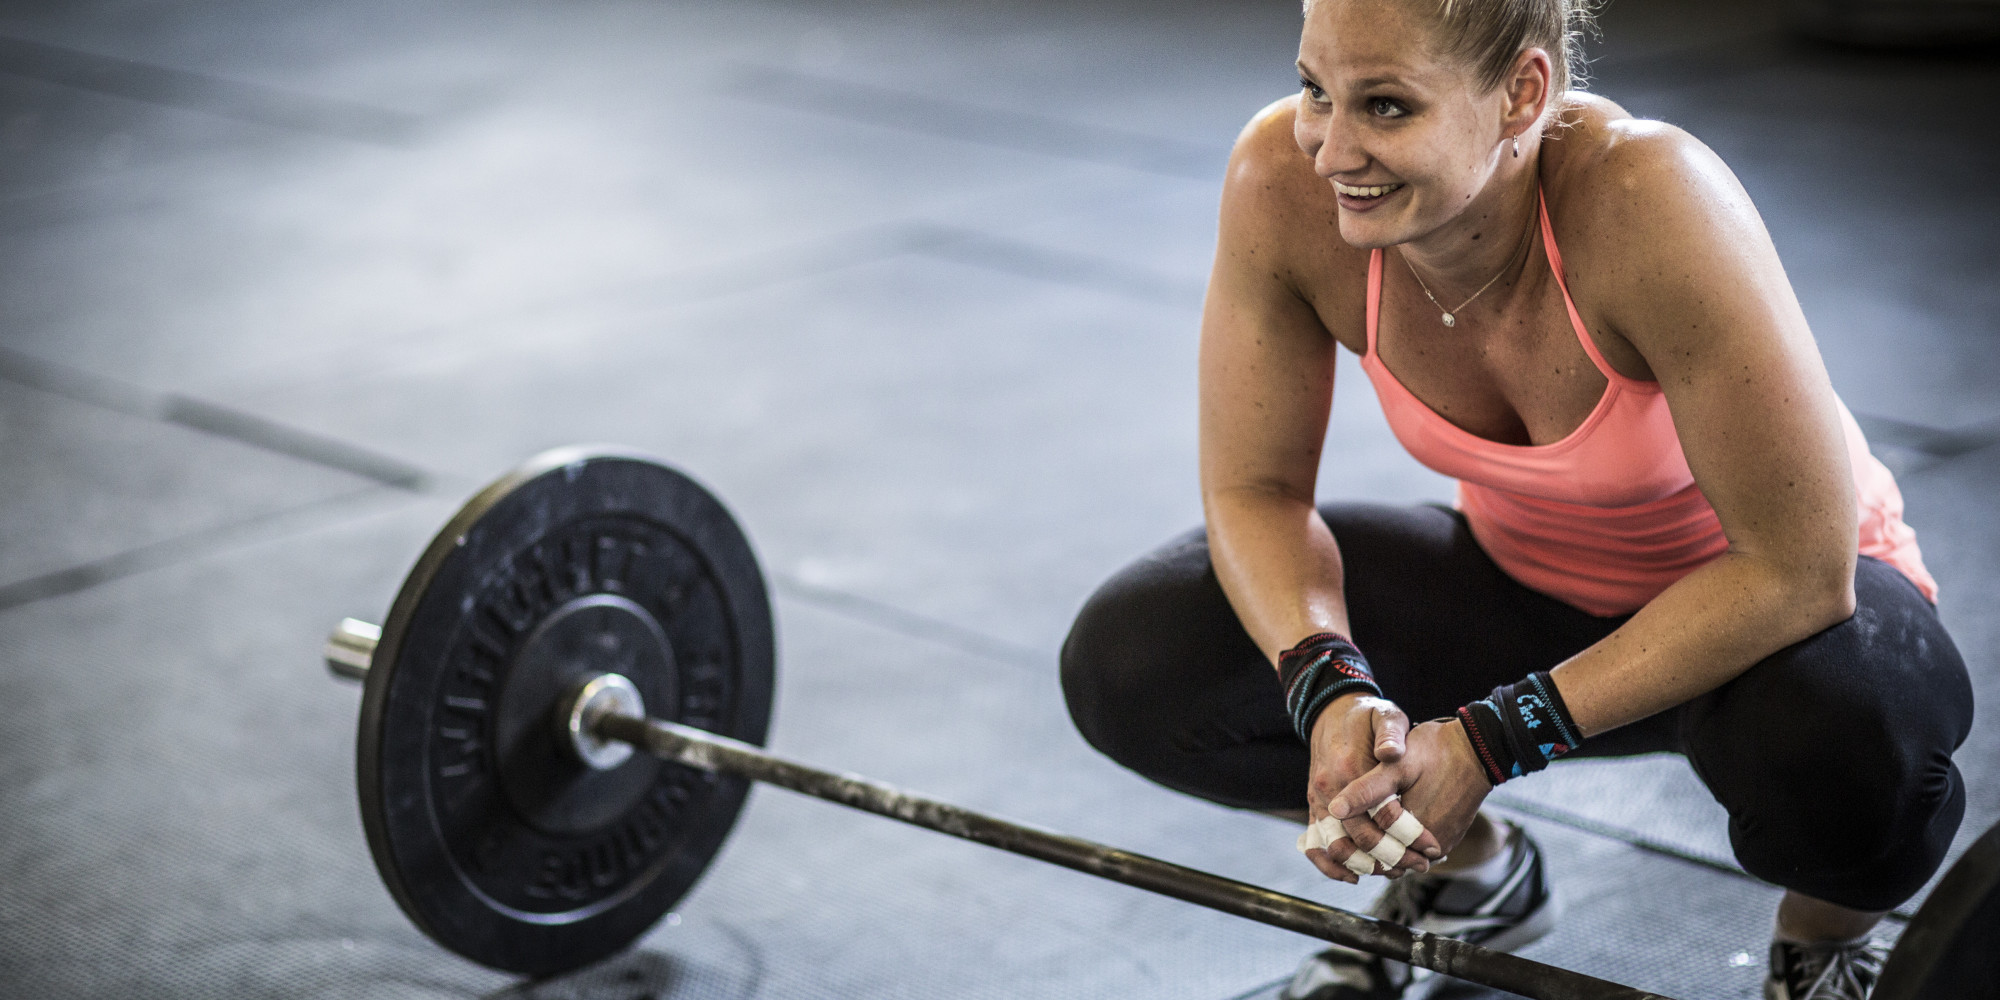 5 Strength Training Truths Every Woman Should Know | HuffPost